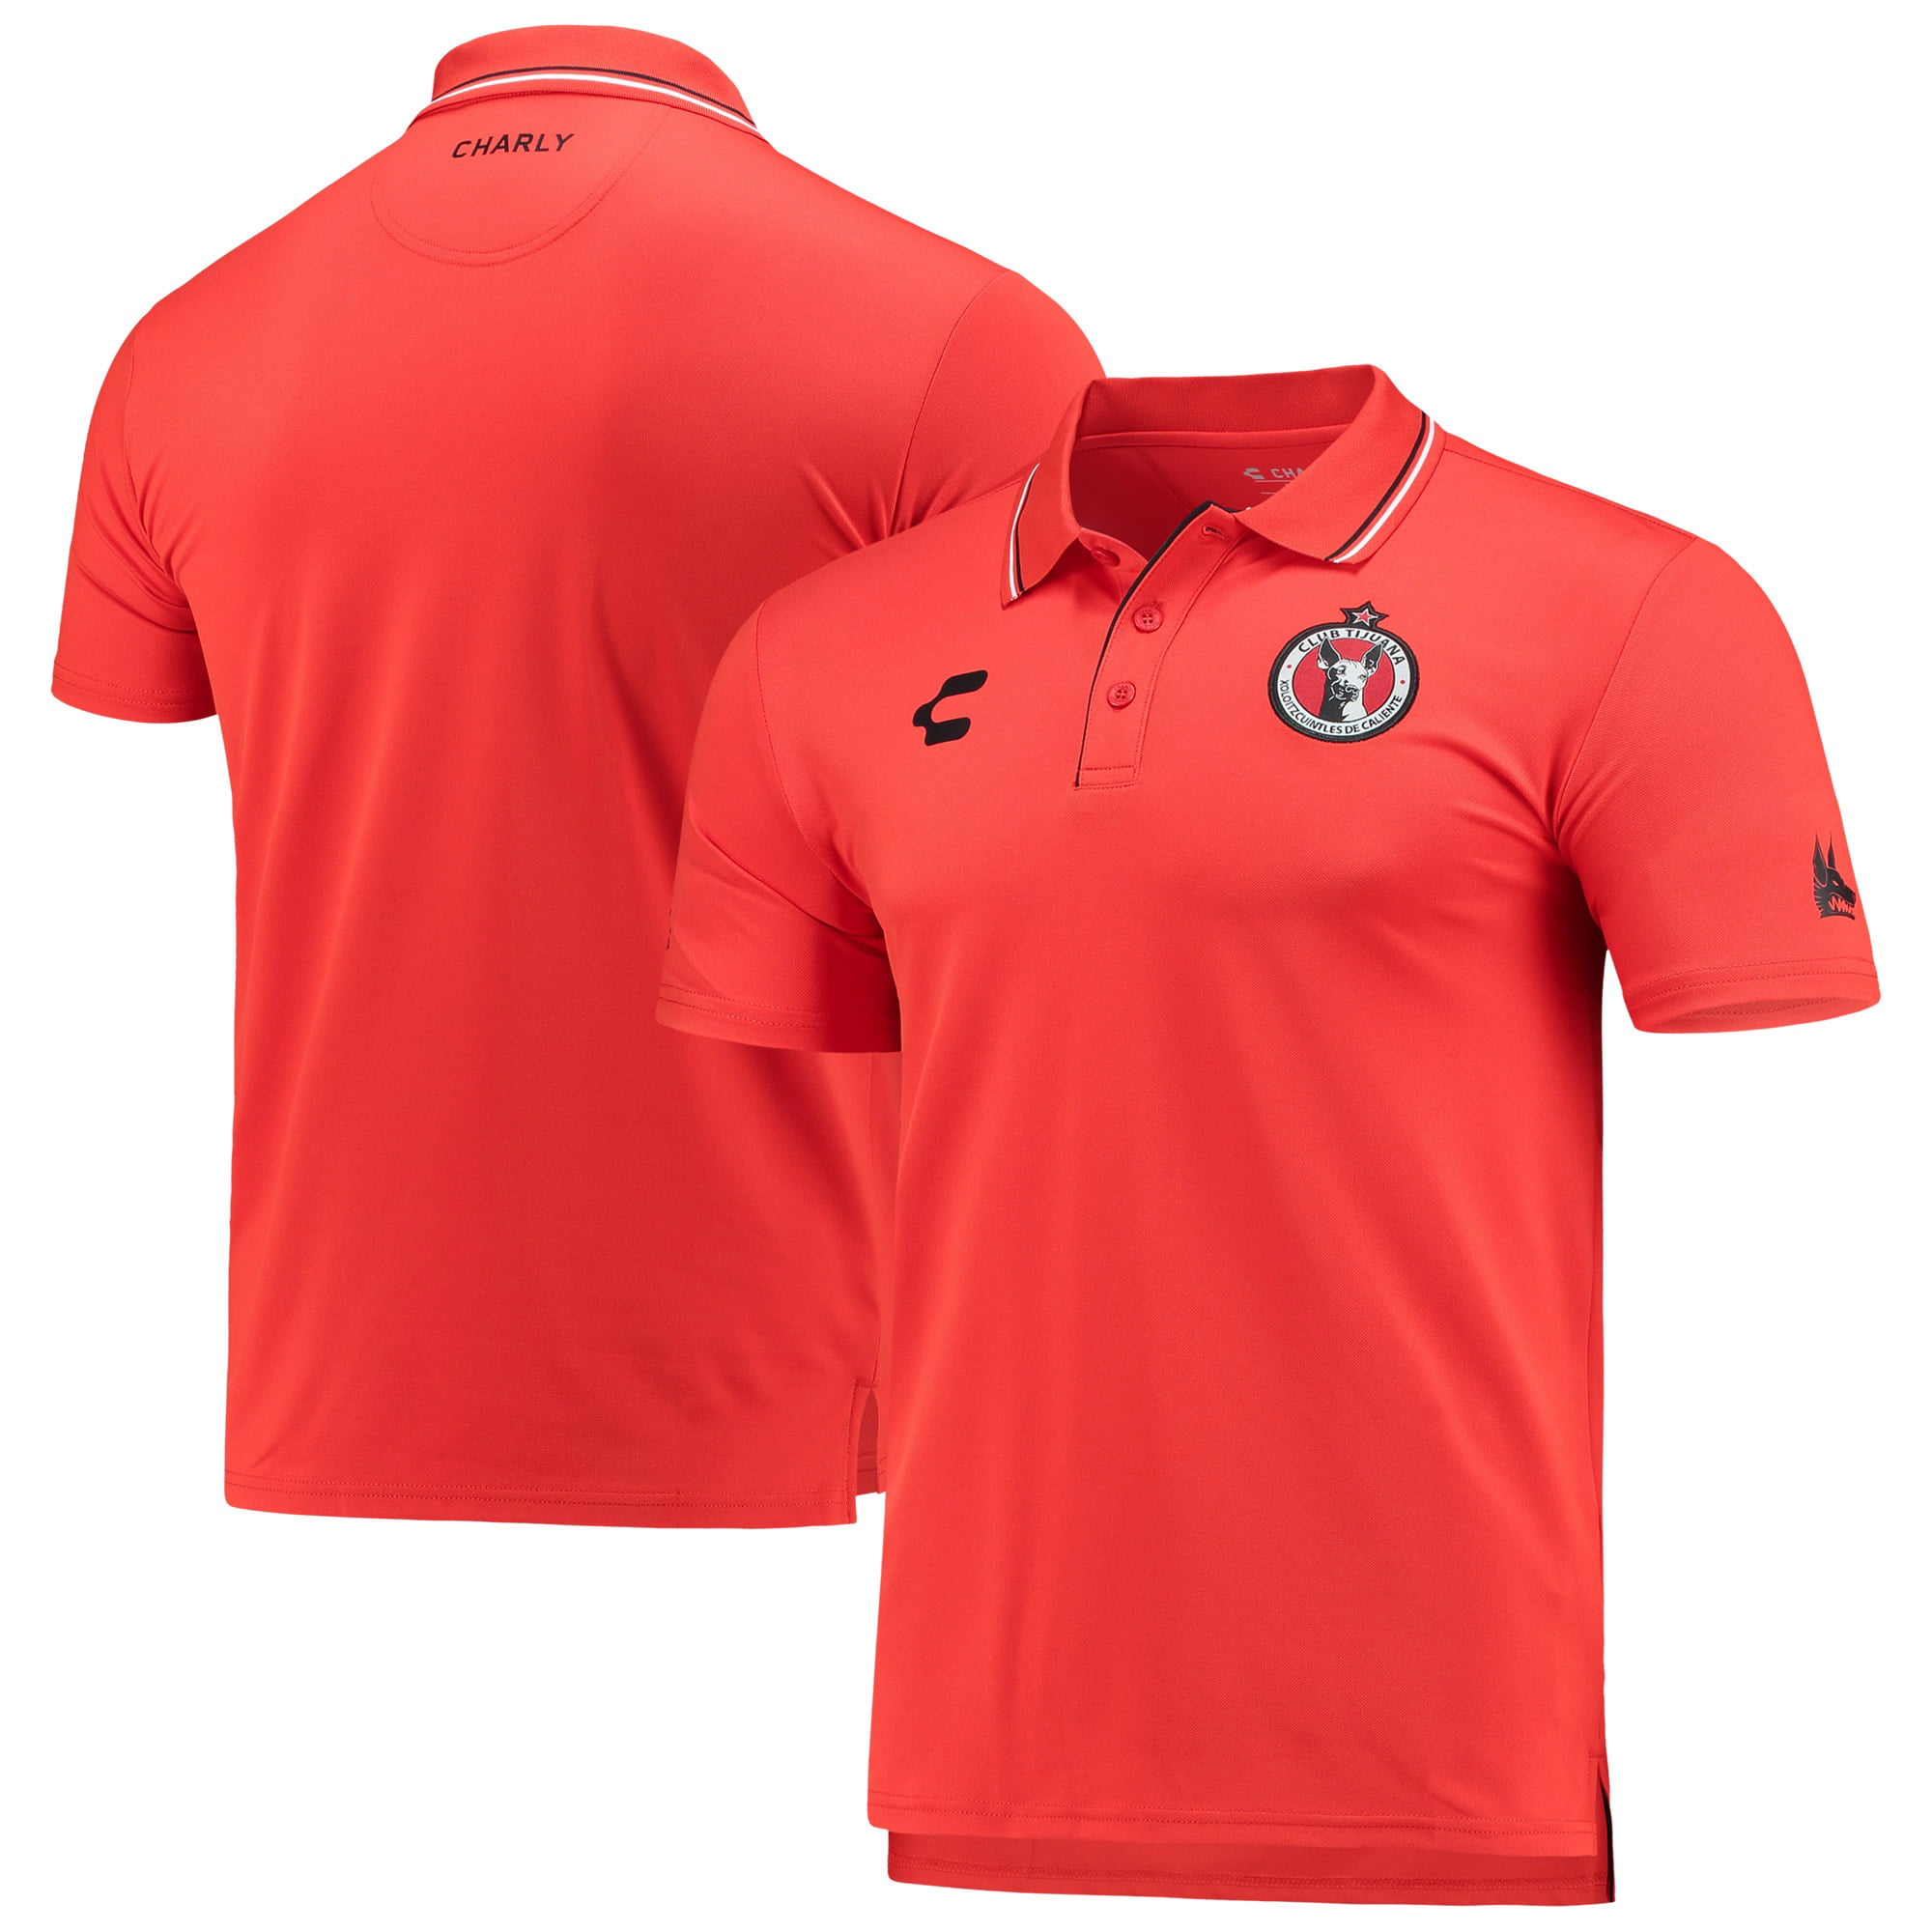 Charly Men's Sports Atlas Polo Shirt Red 